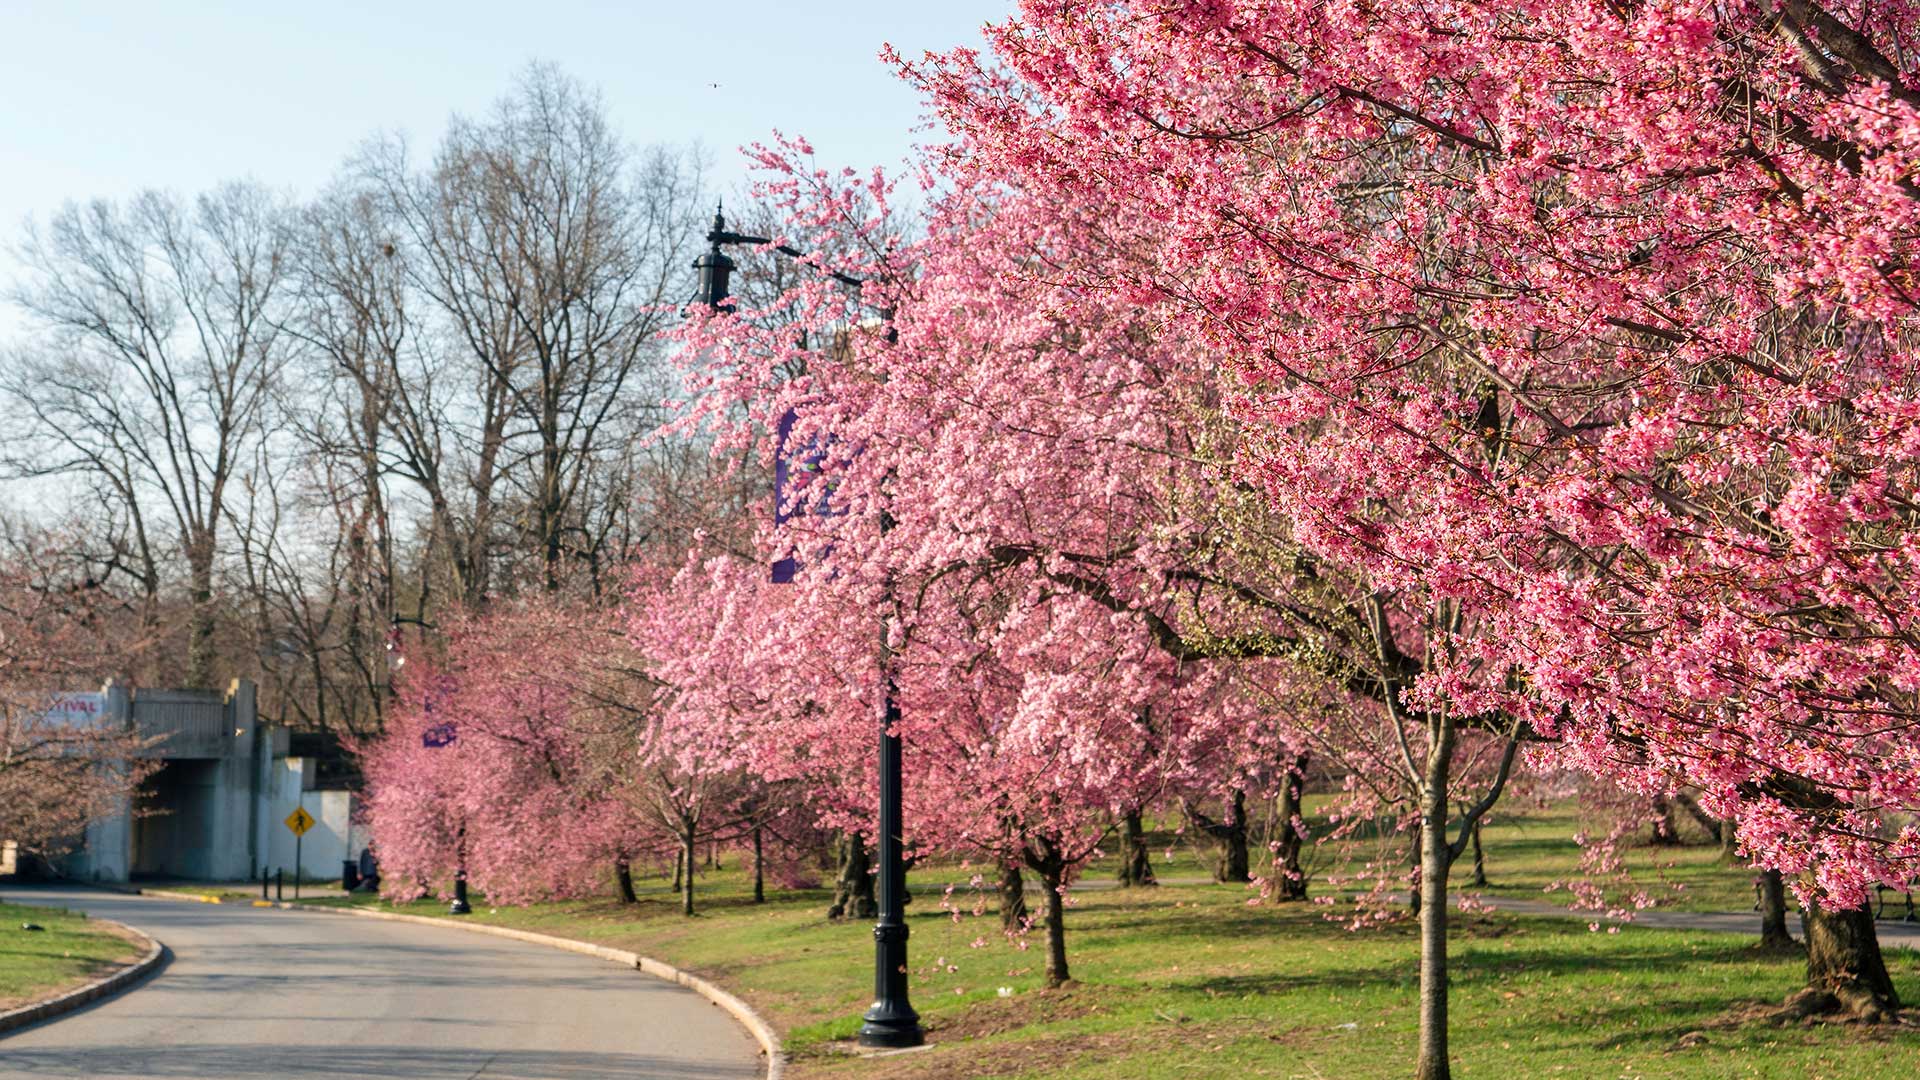 Pink cherry blossoms in Branch Brook Park in Newark, New Jersey